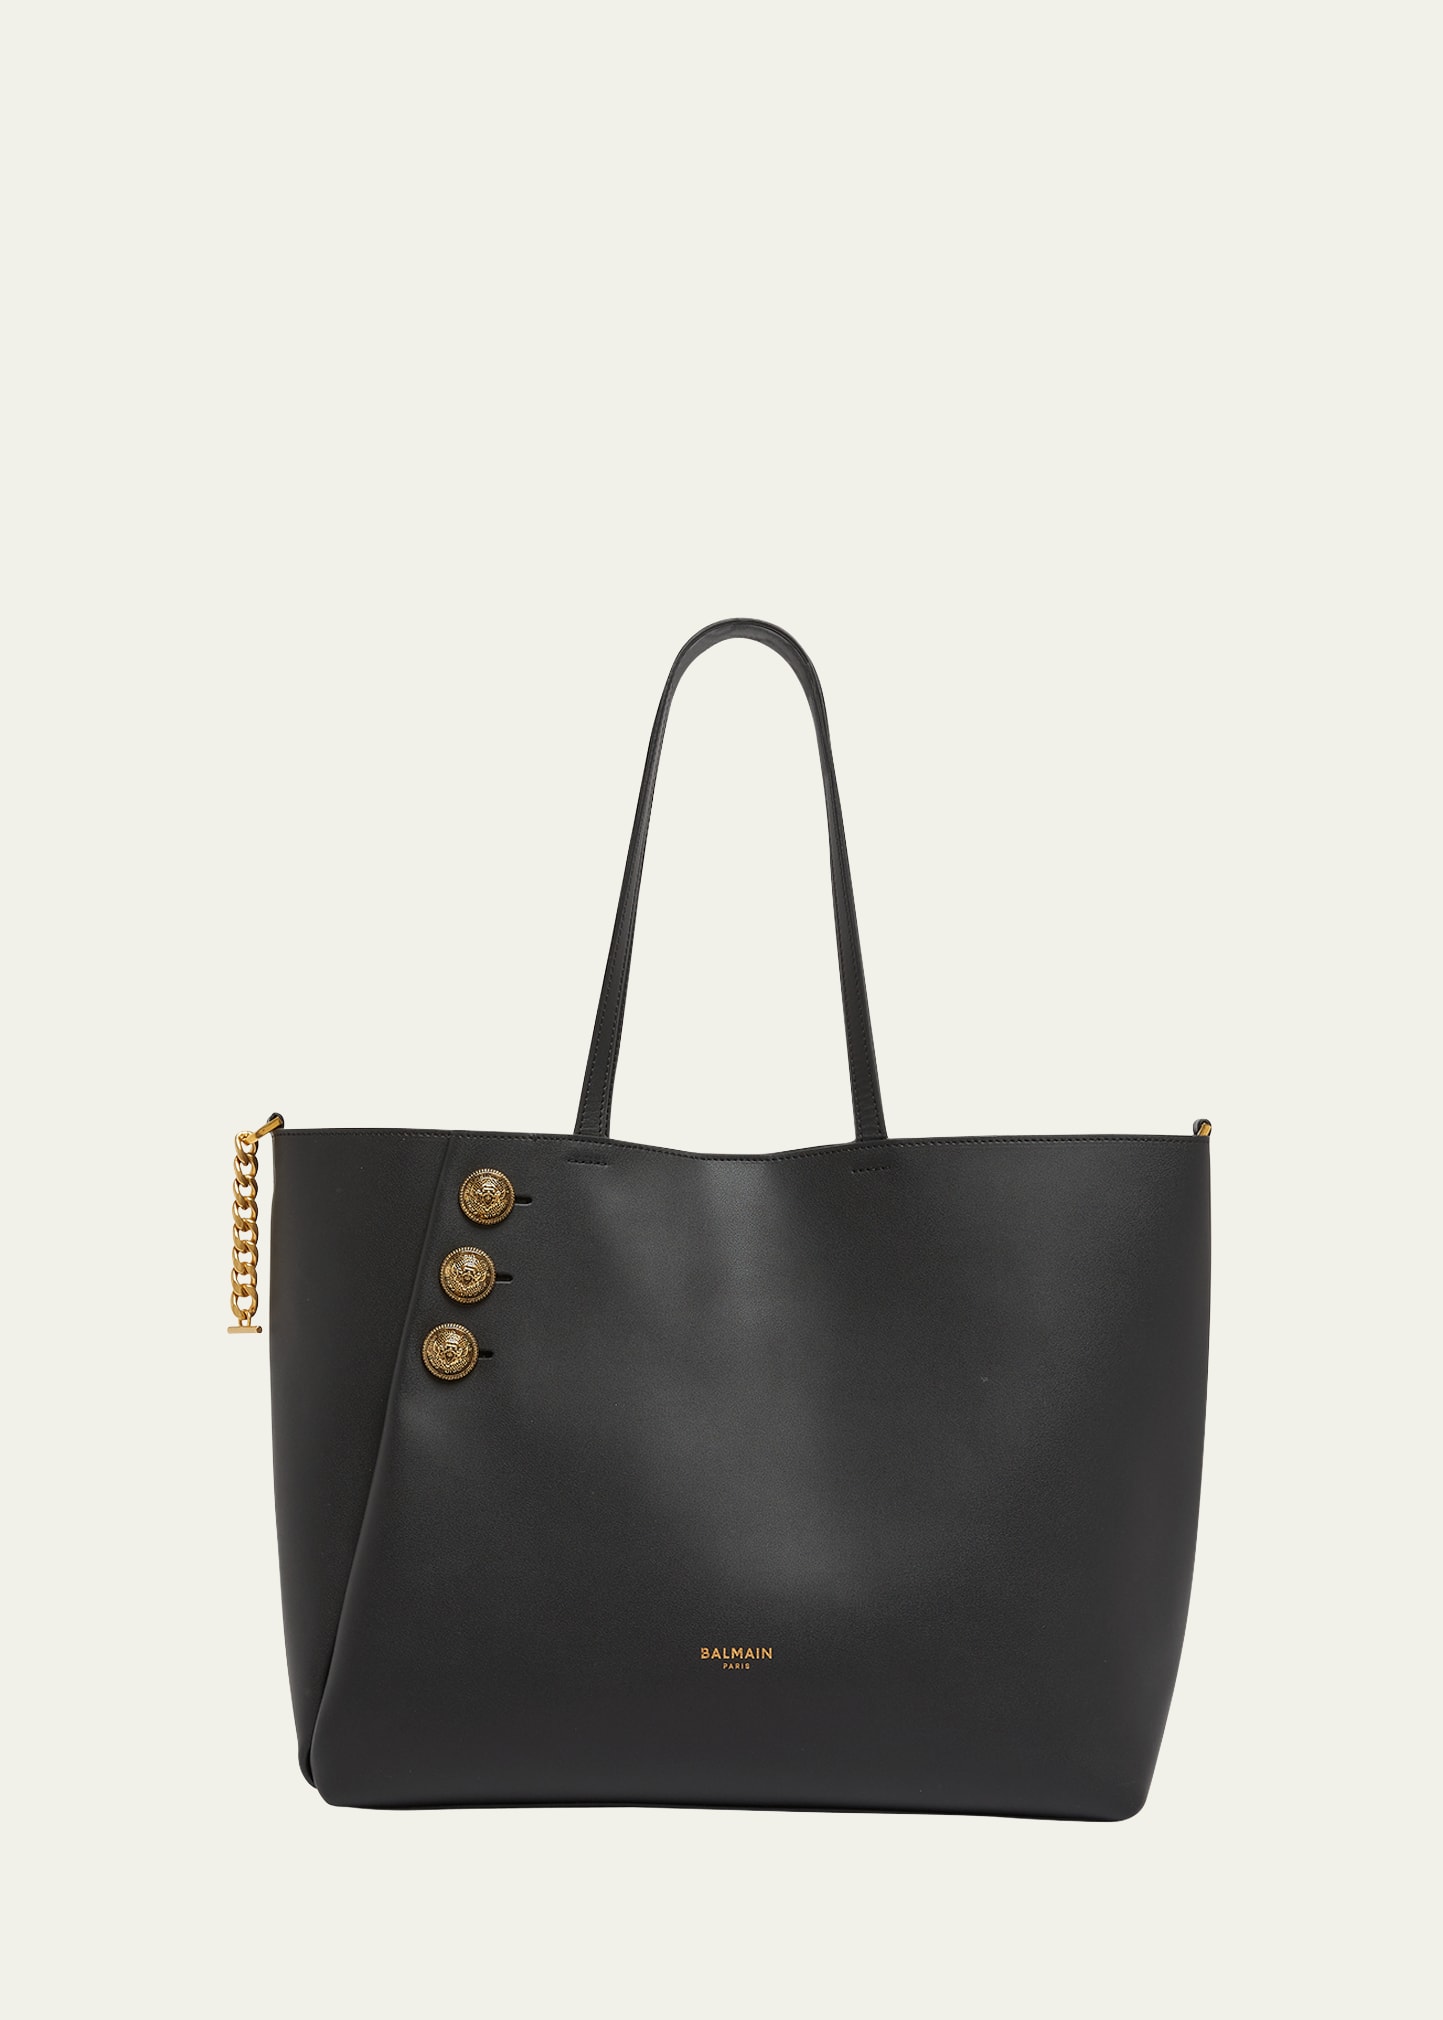 Embleme Shopper Tote Bag in Smooth Leather